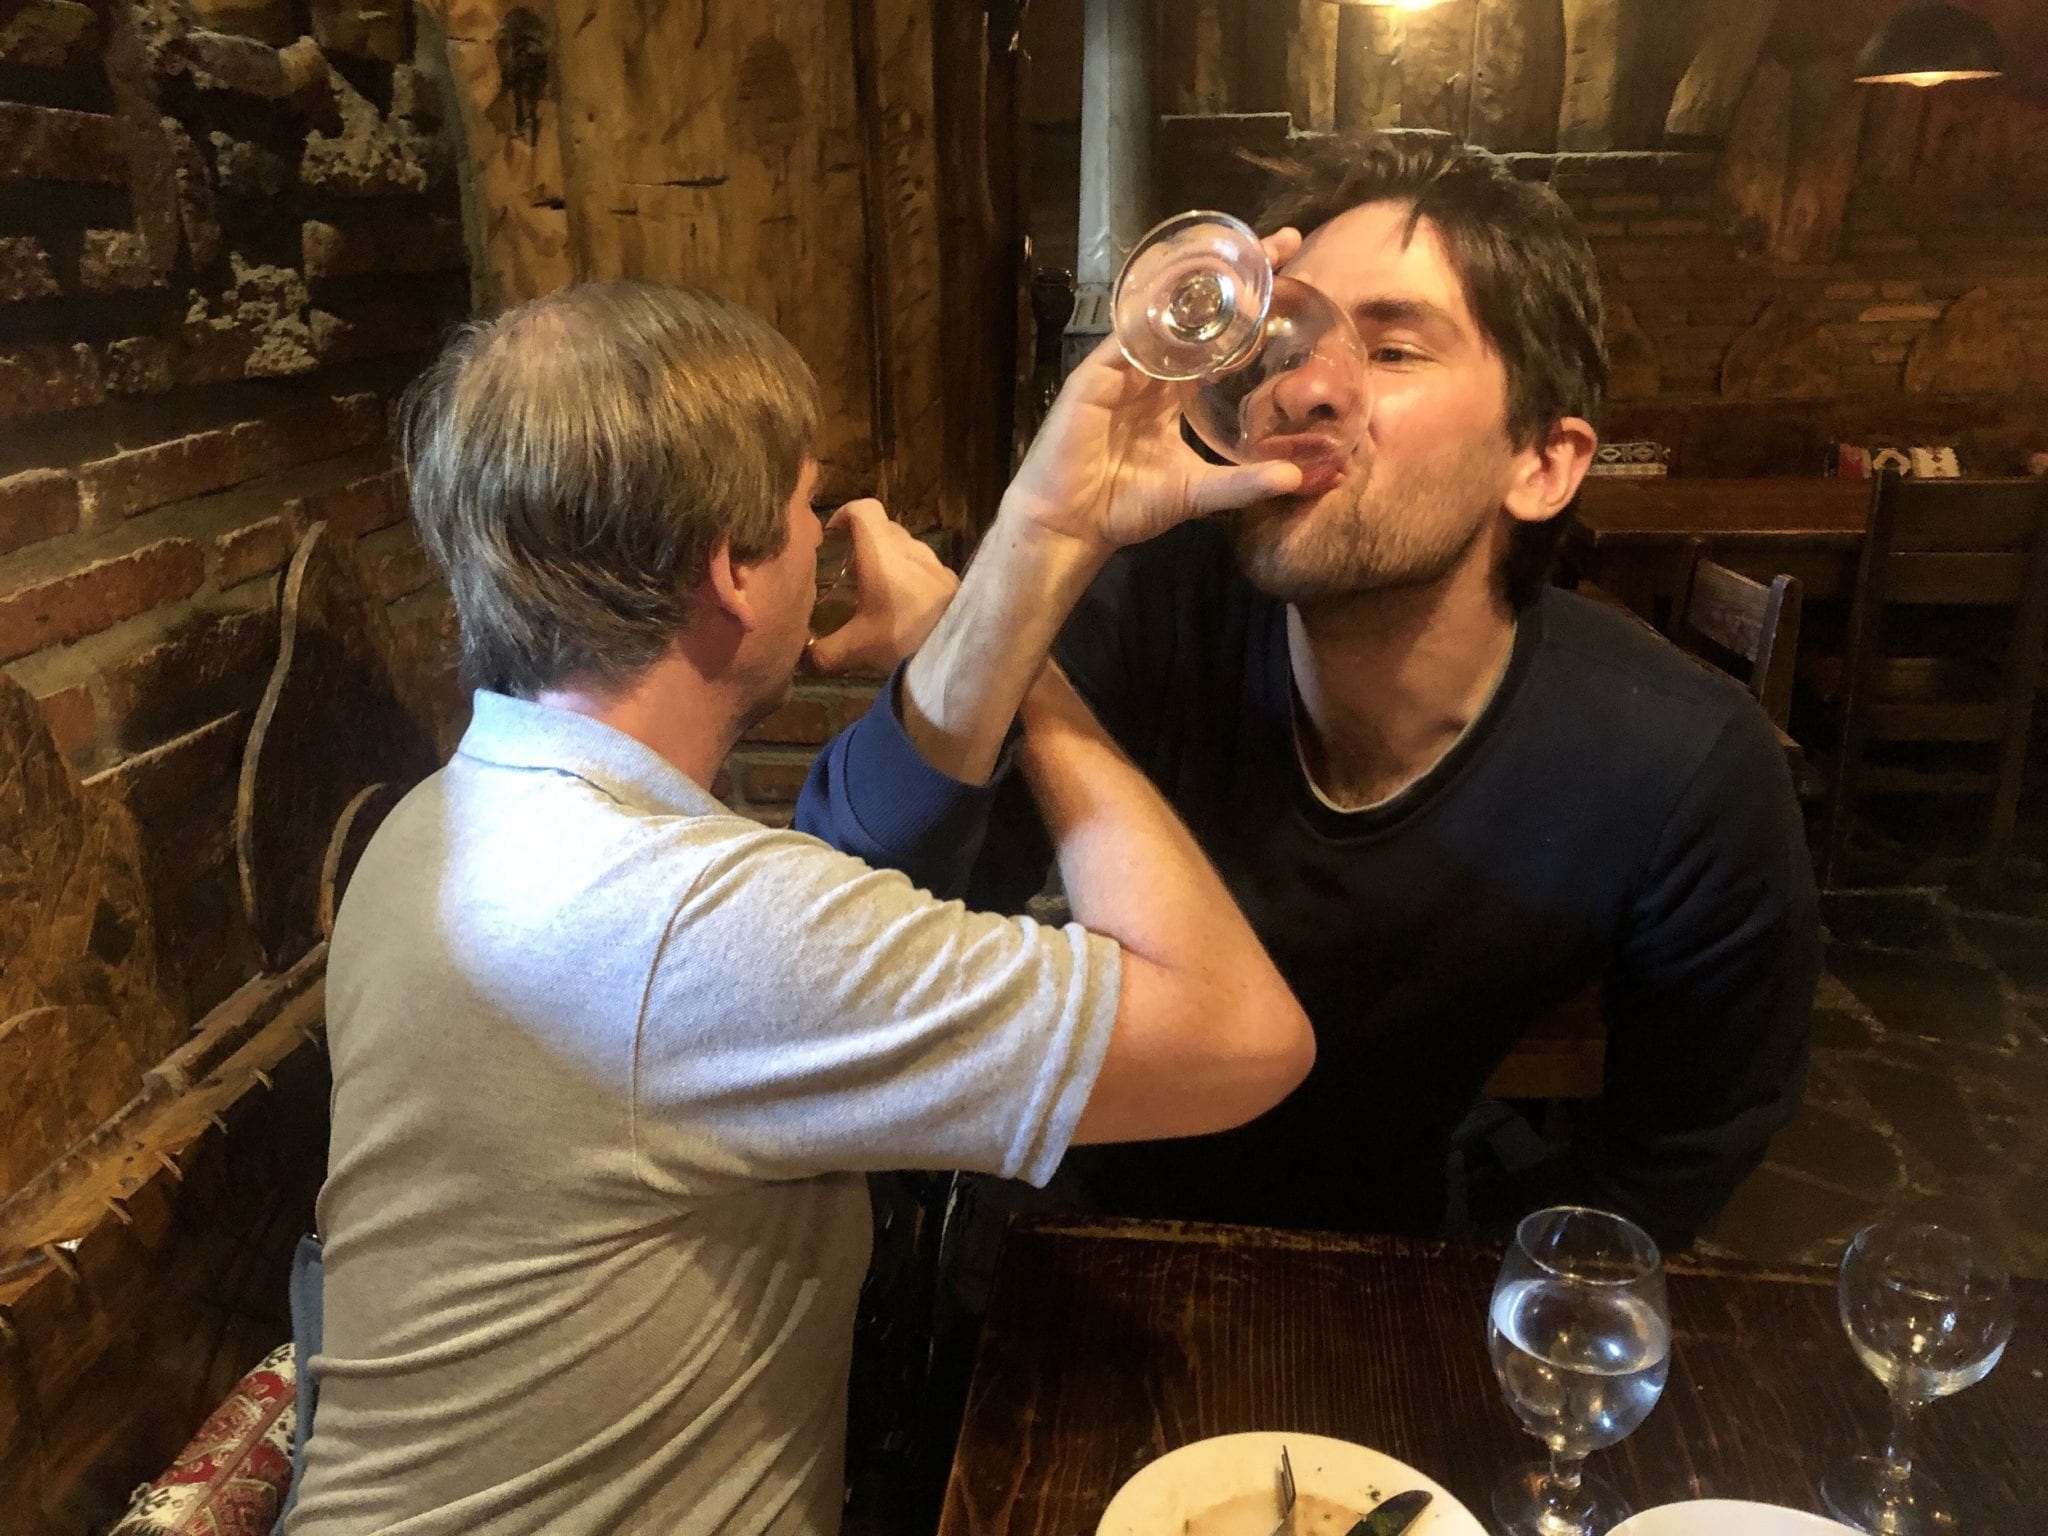 Tom and the Russian owner of the restaurant drink very full glasses of wine with their drinking arms entwined.